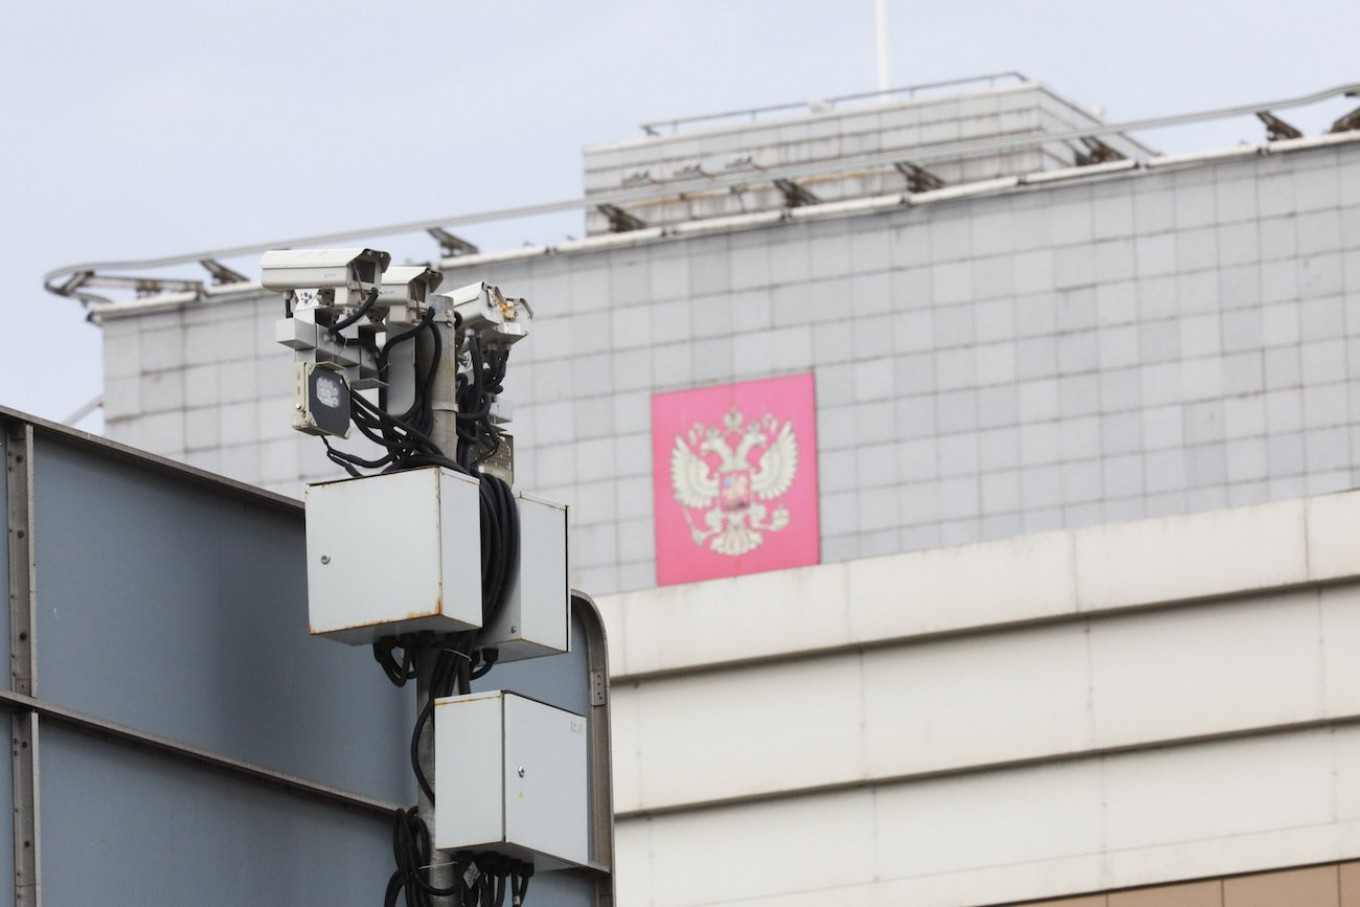 Thousands of Russian Surveillance Cameras Vulnerable to Cyberattack – Reports